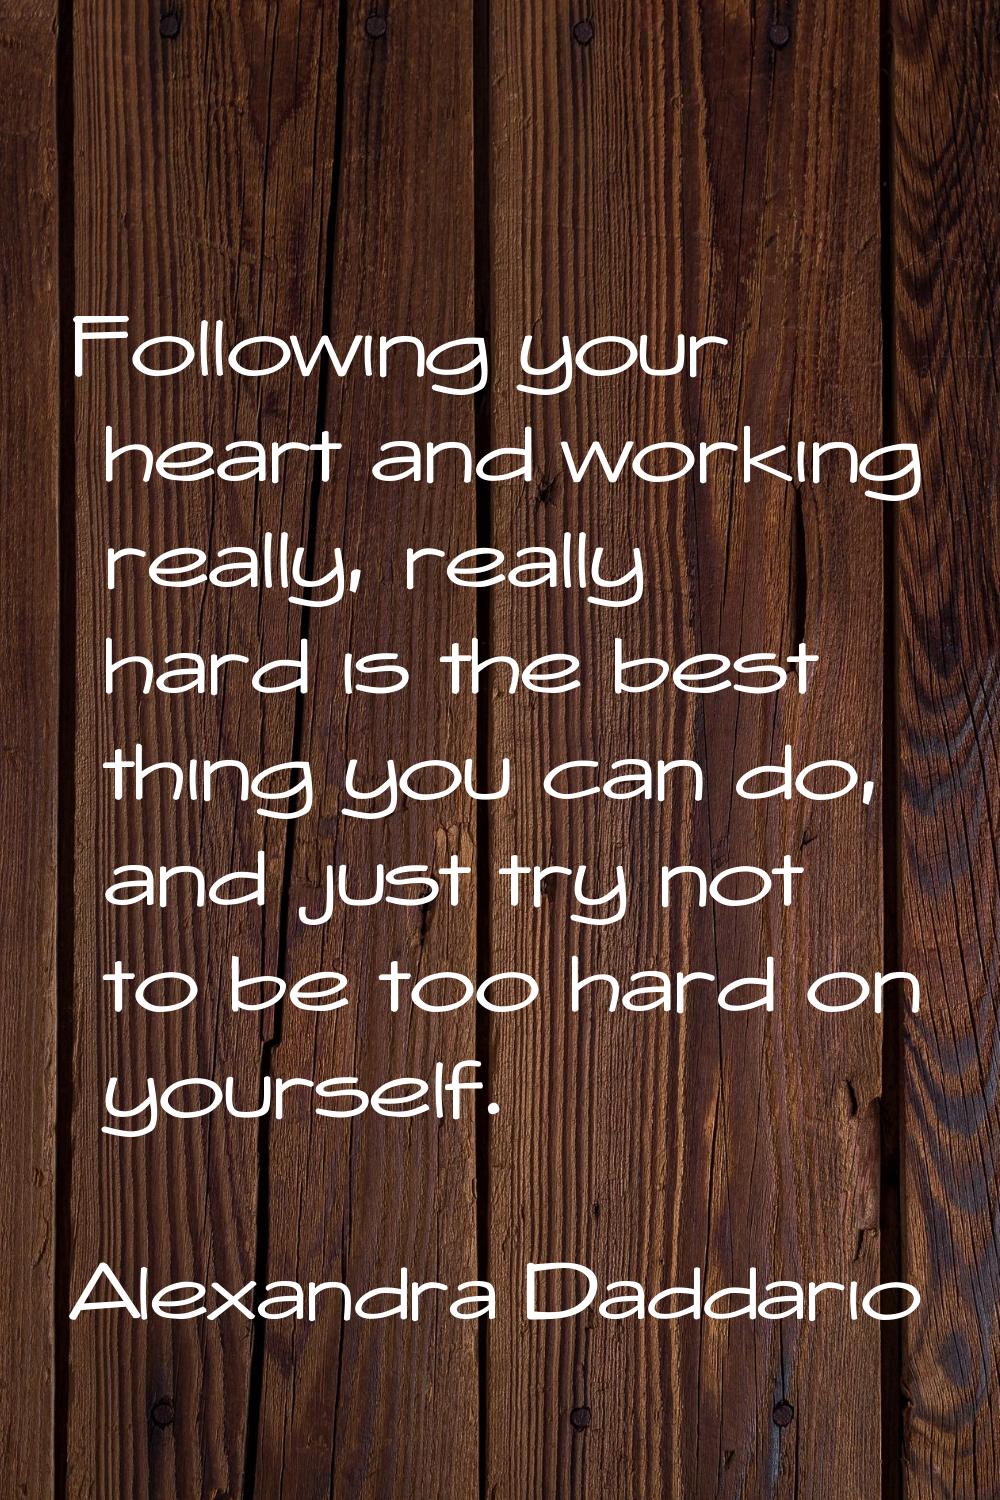 Following your heart and working really, really hard is the best thing you can do, and just try not